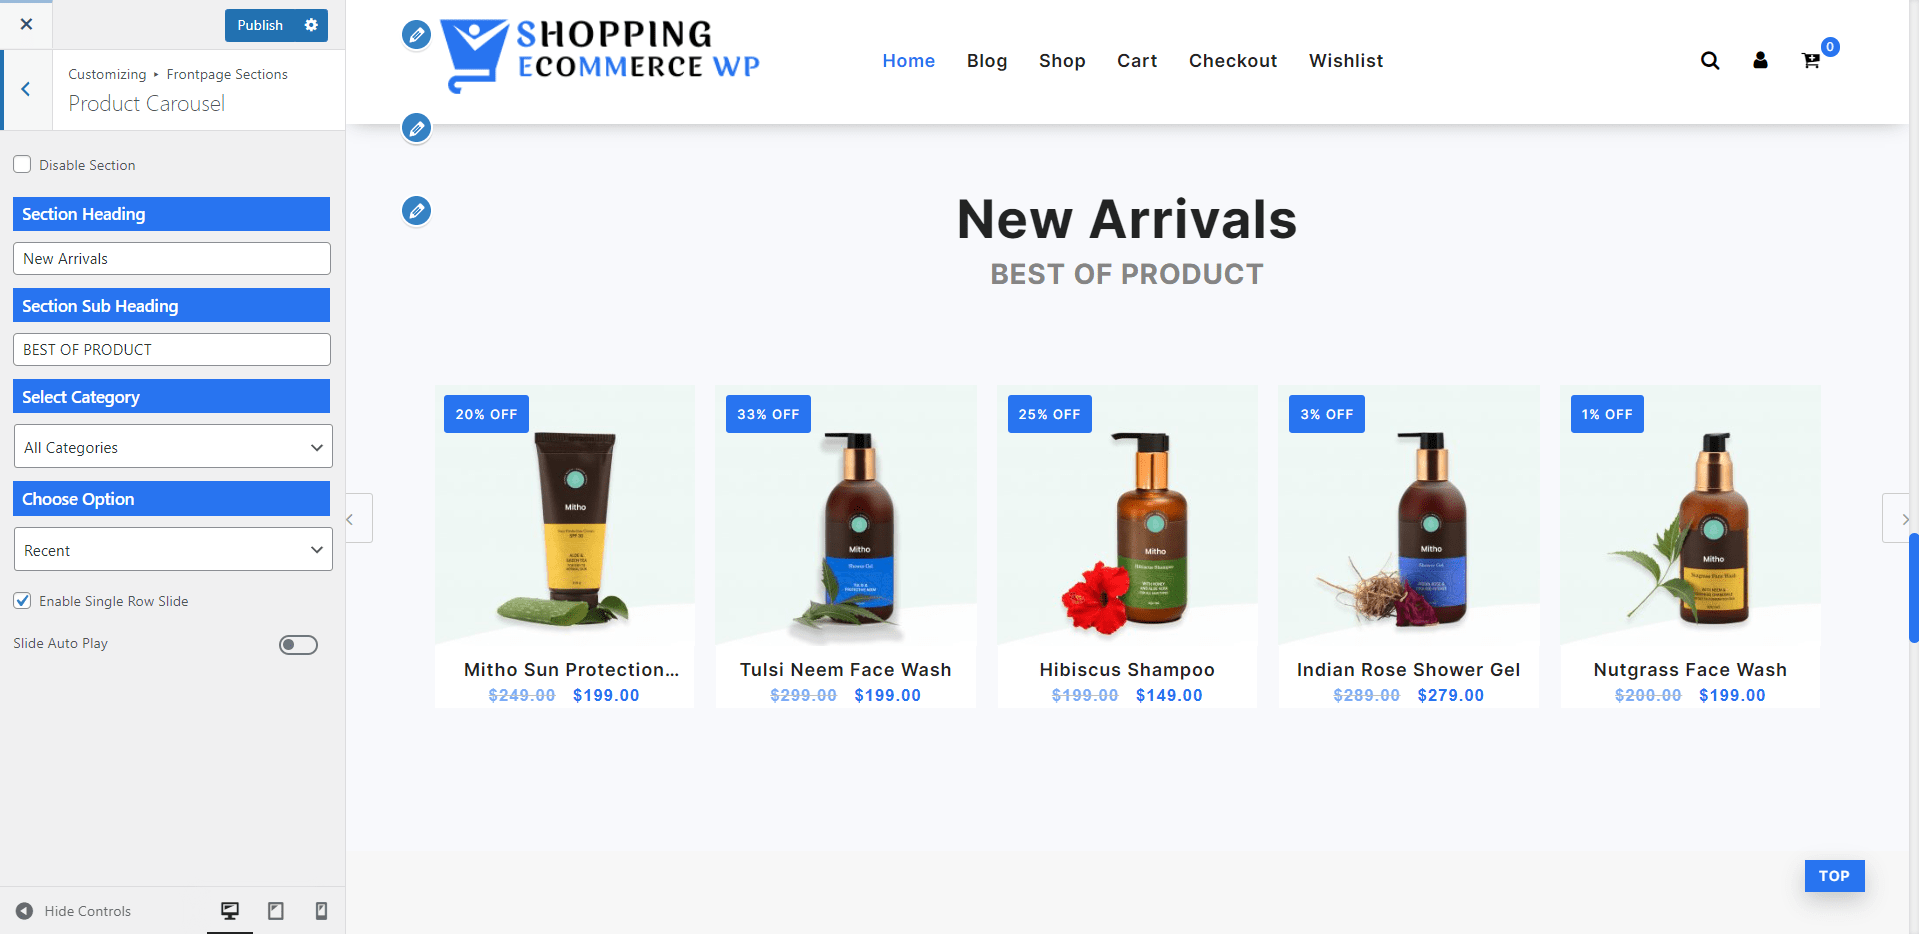 Product Carousel Section